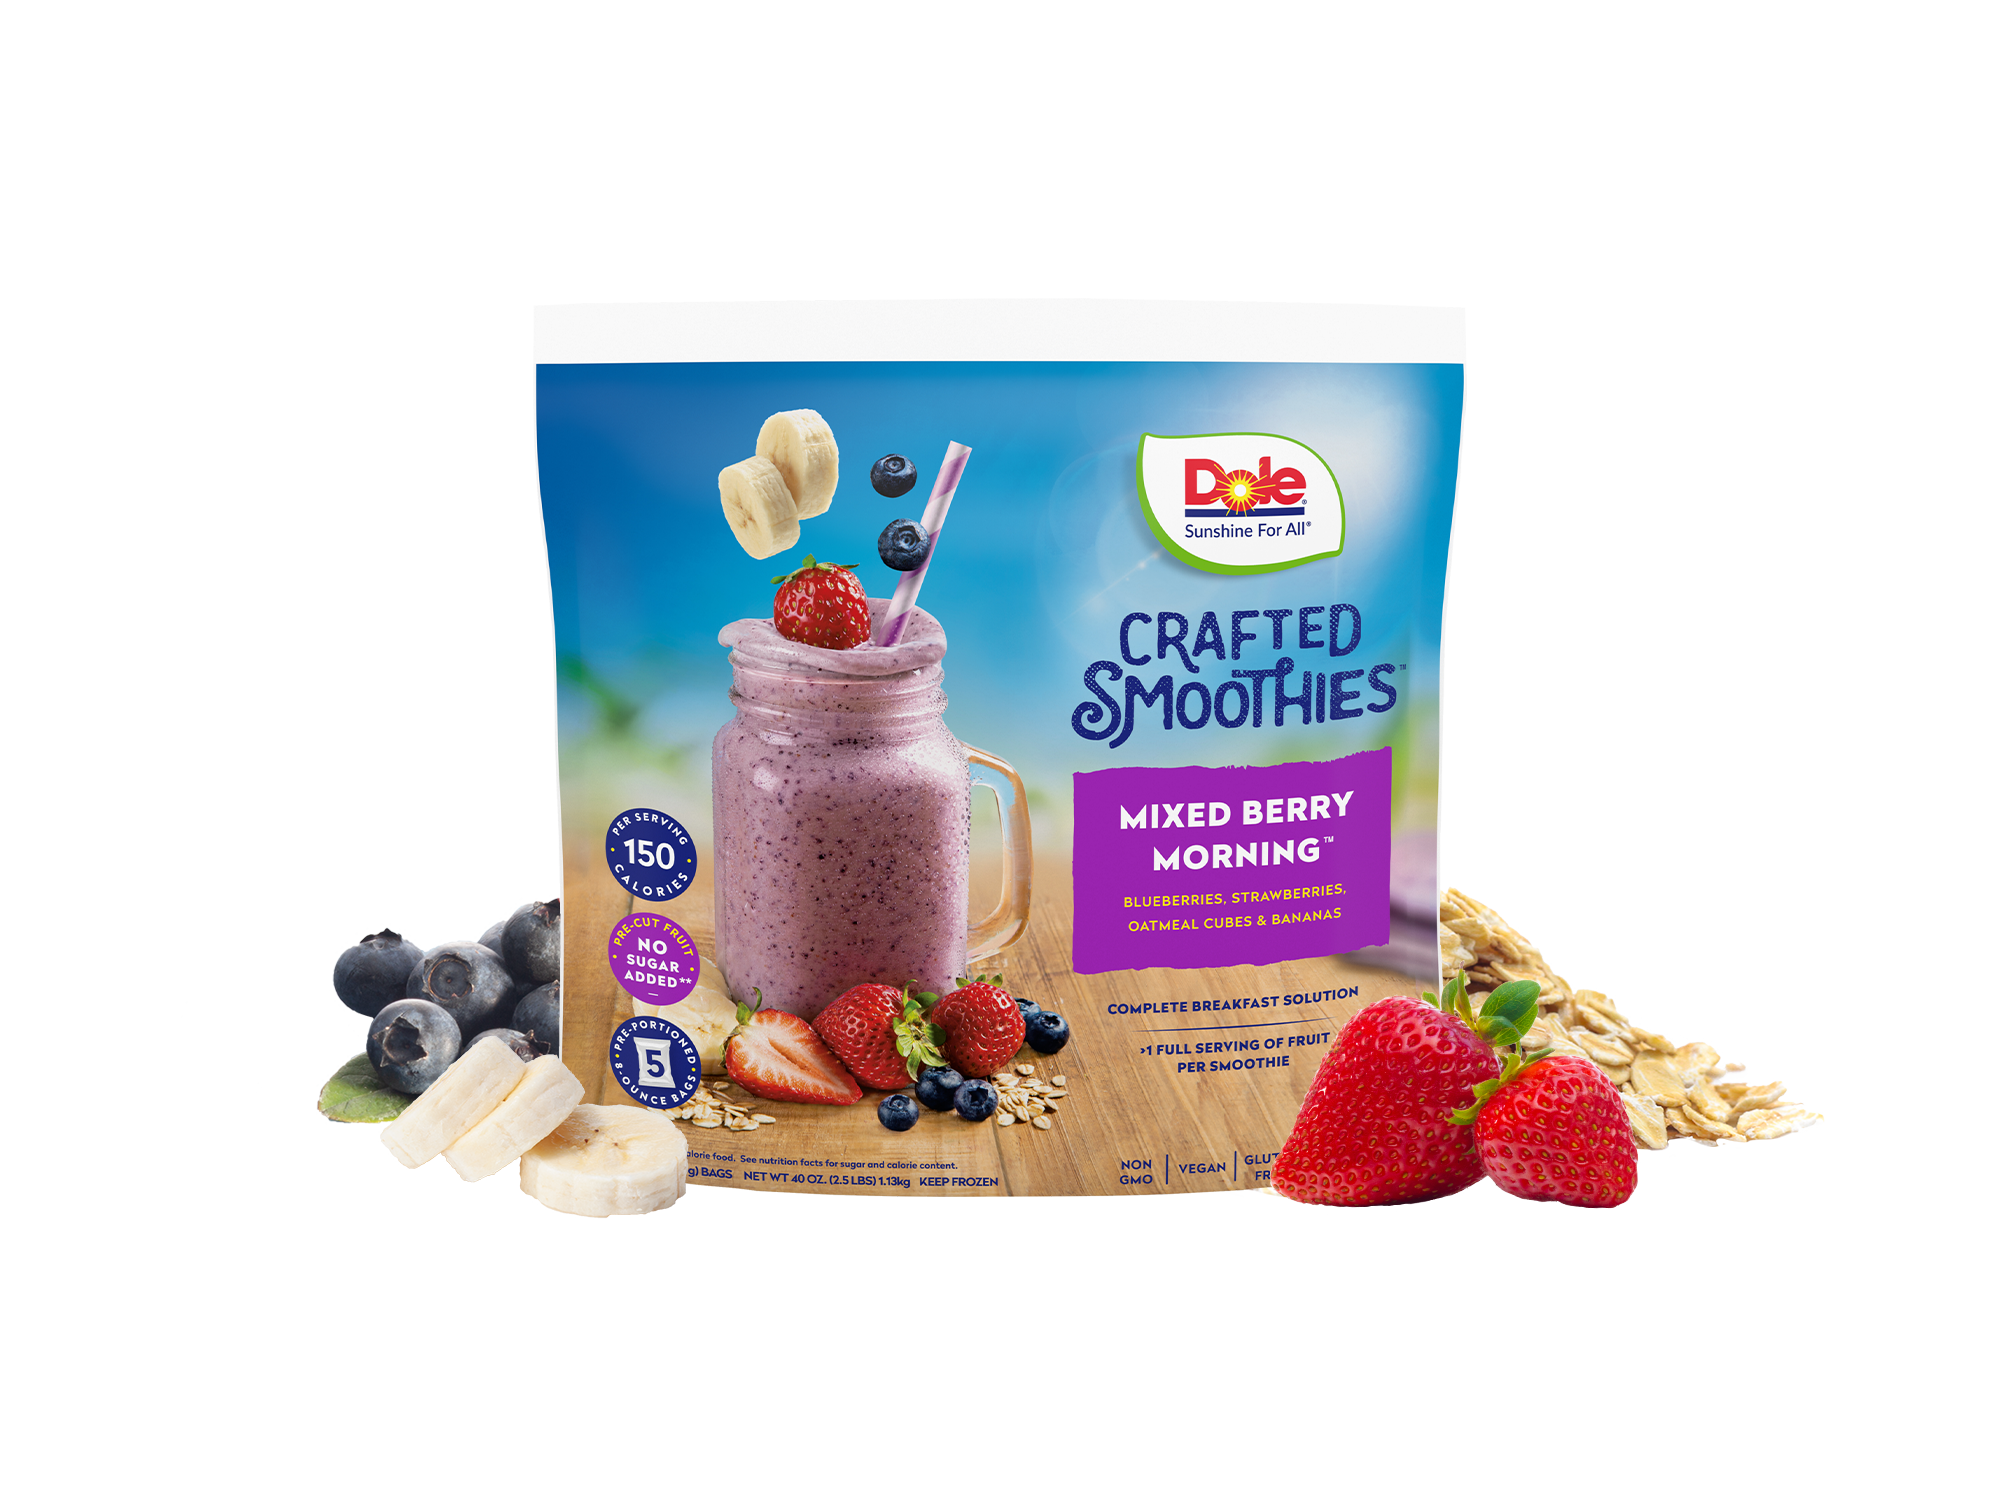 https://dolesunshine.com/wp-content/uploads/sites/2/2022/03/Crafted-Smoothie-Blend-Mixed-Berry-Morning-40oz-Composite-1.png